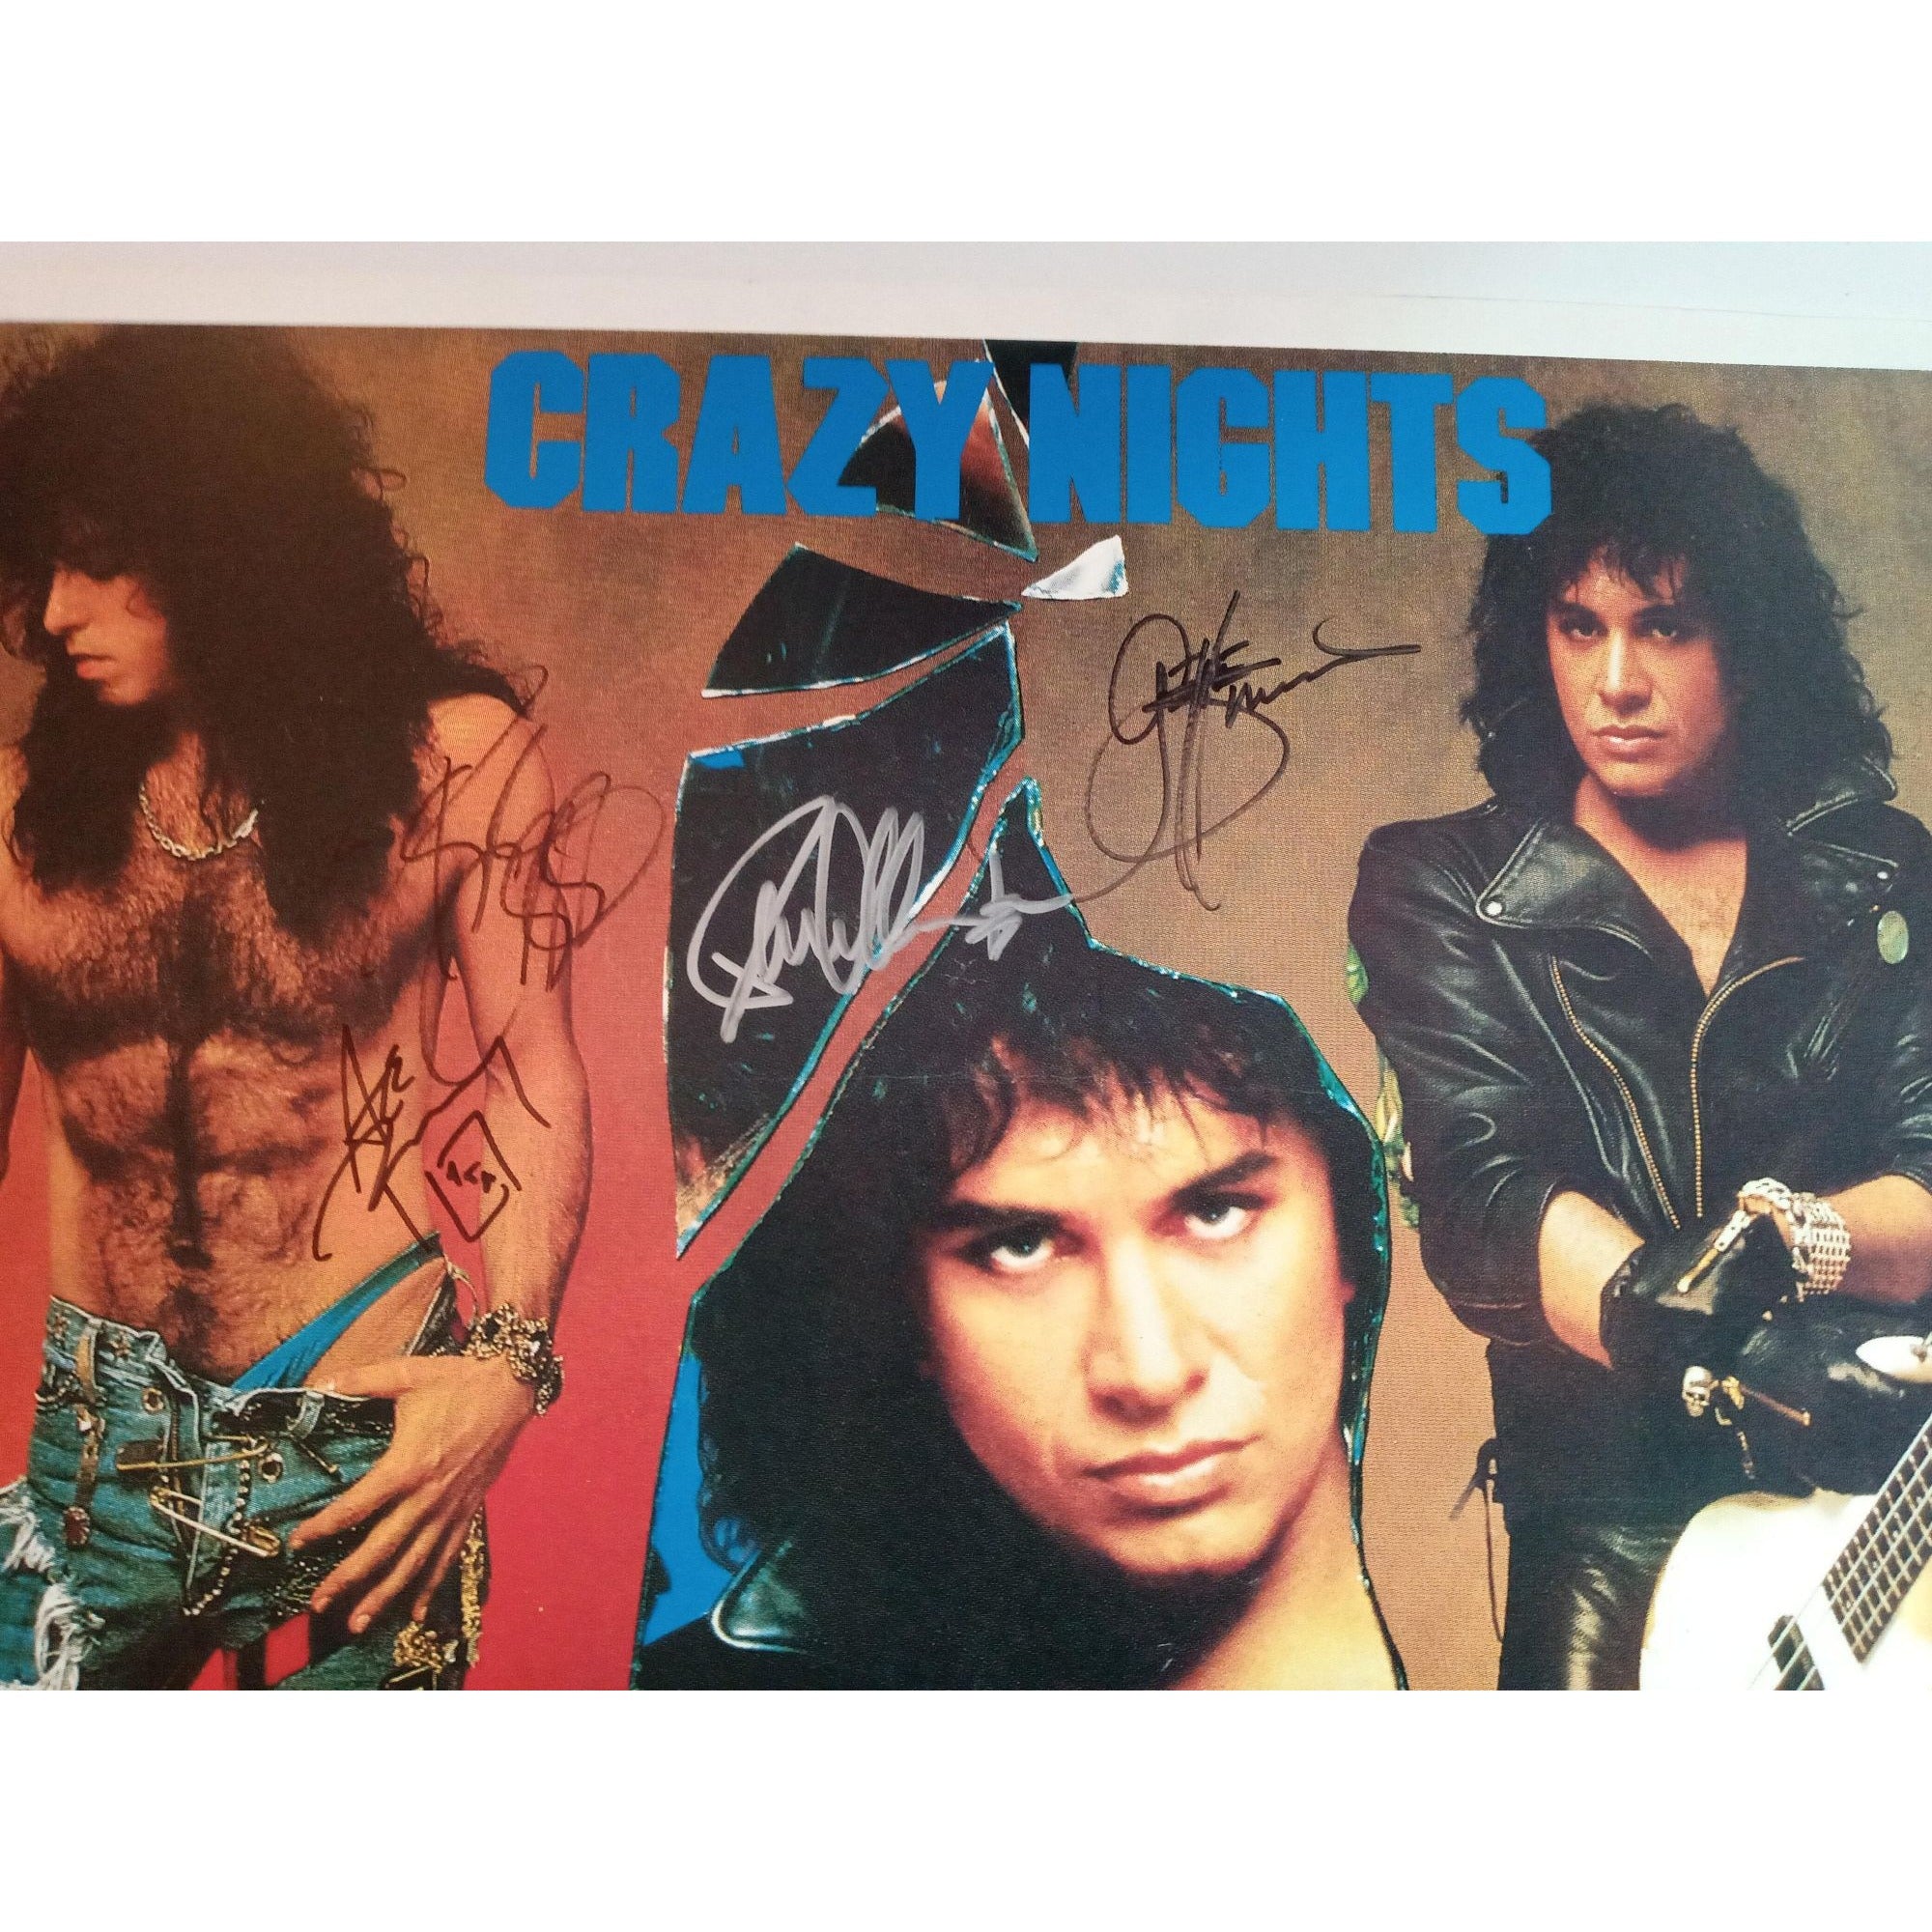 KISS Peter Criss Paul Stanley Ace Frehley and Gene Simmons signed poster